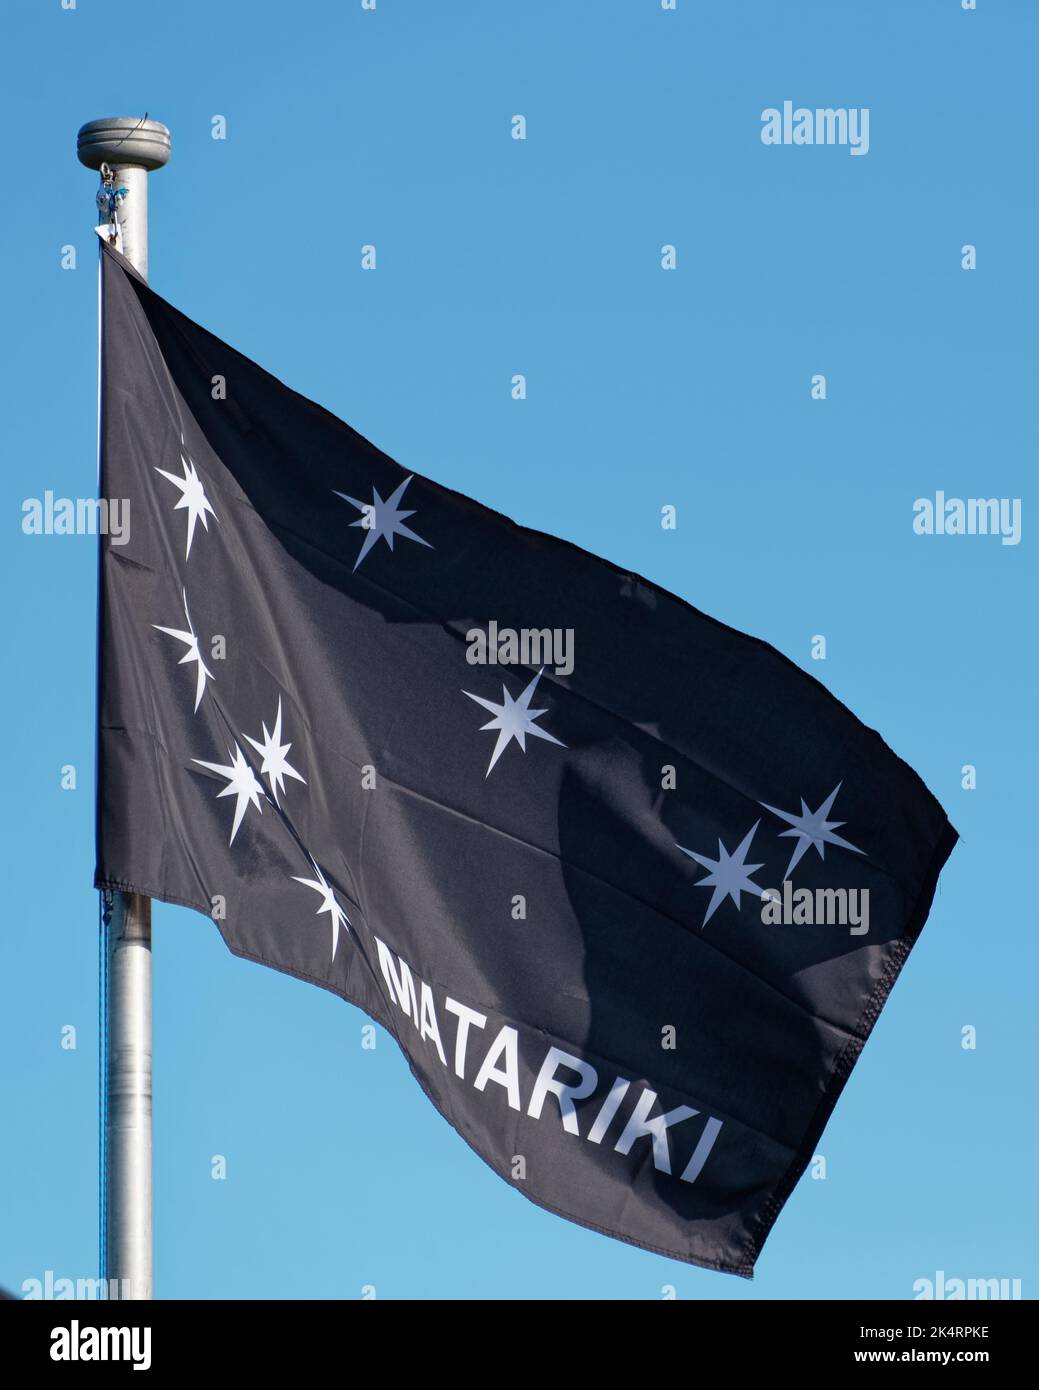 Matariki is signified by the Matariki cluster of stars reappearing in Aotearoa New Zealand's night sky. It is a time of reflection, celebration and pl Stock Photo